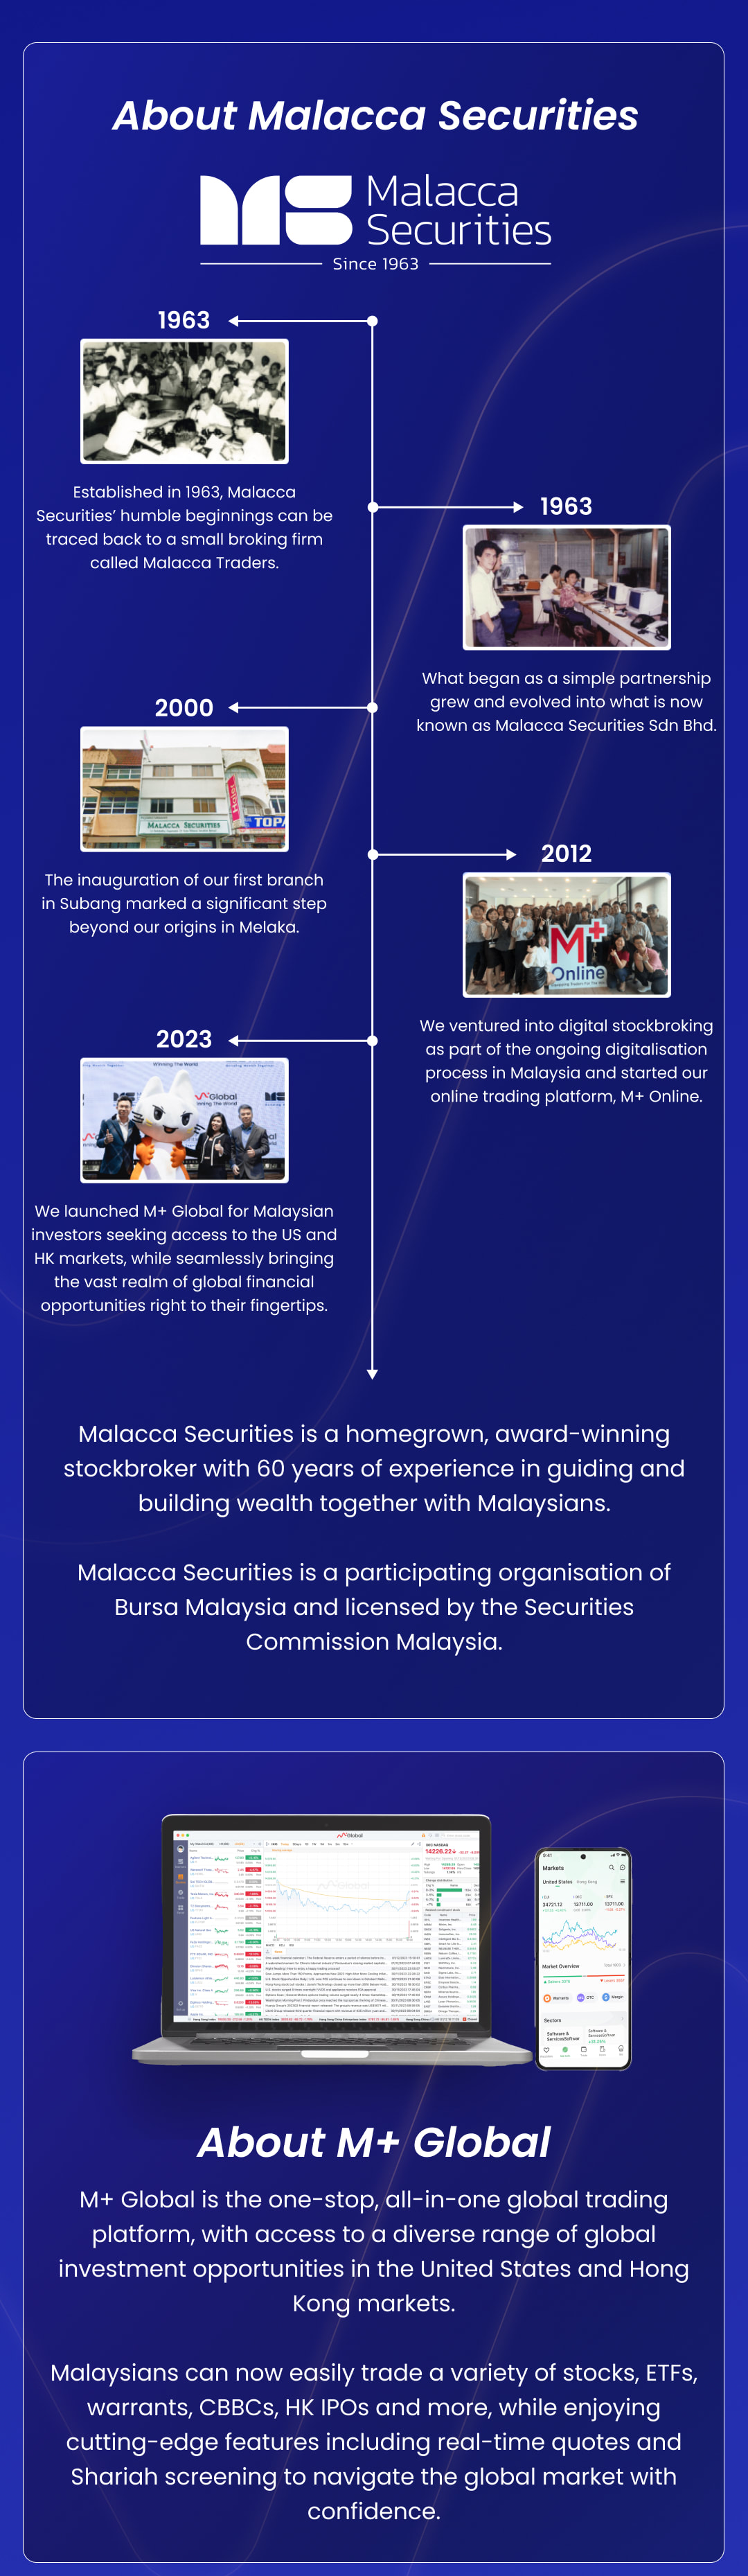 Who is Mplus , Who is Malacca Securities, Malacca Securities, Remisier, M+ Global, M+ Online